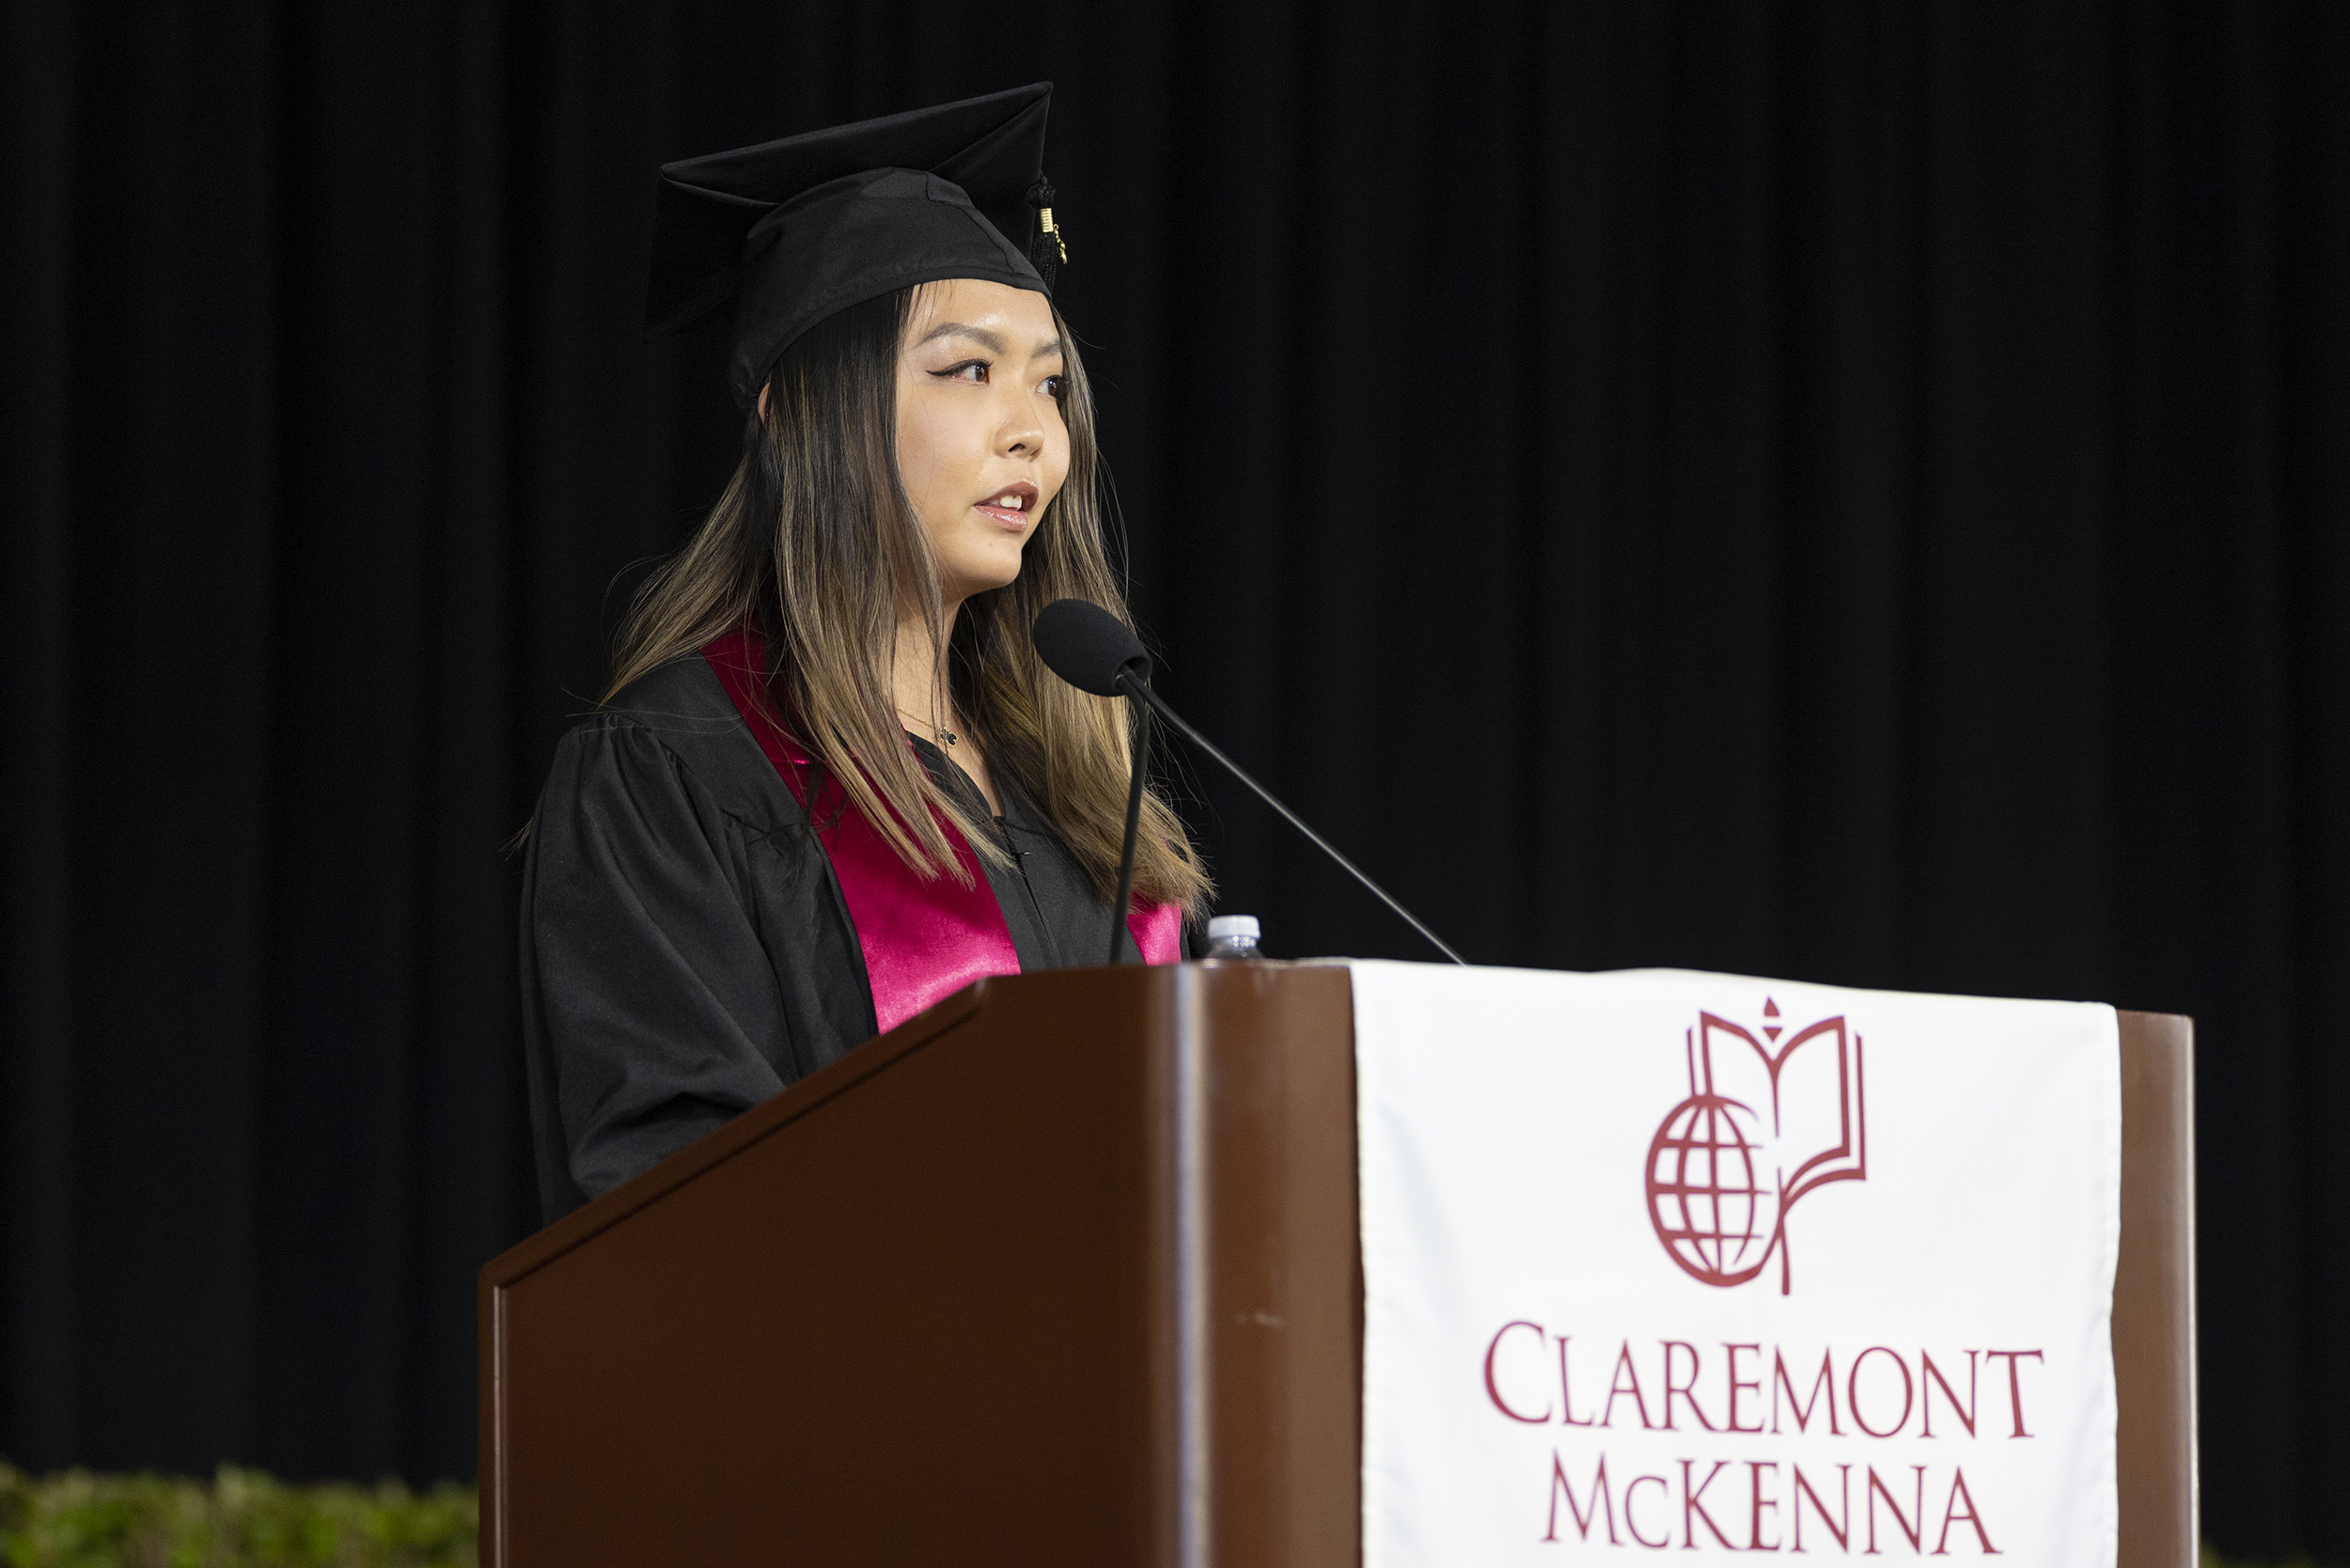 Class of 2021 Senior Class President Grace (Qingyang) Wang ’21 speaks at the podium during celebration weekend for classes of 2020 and 2021.06